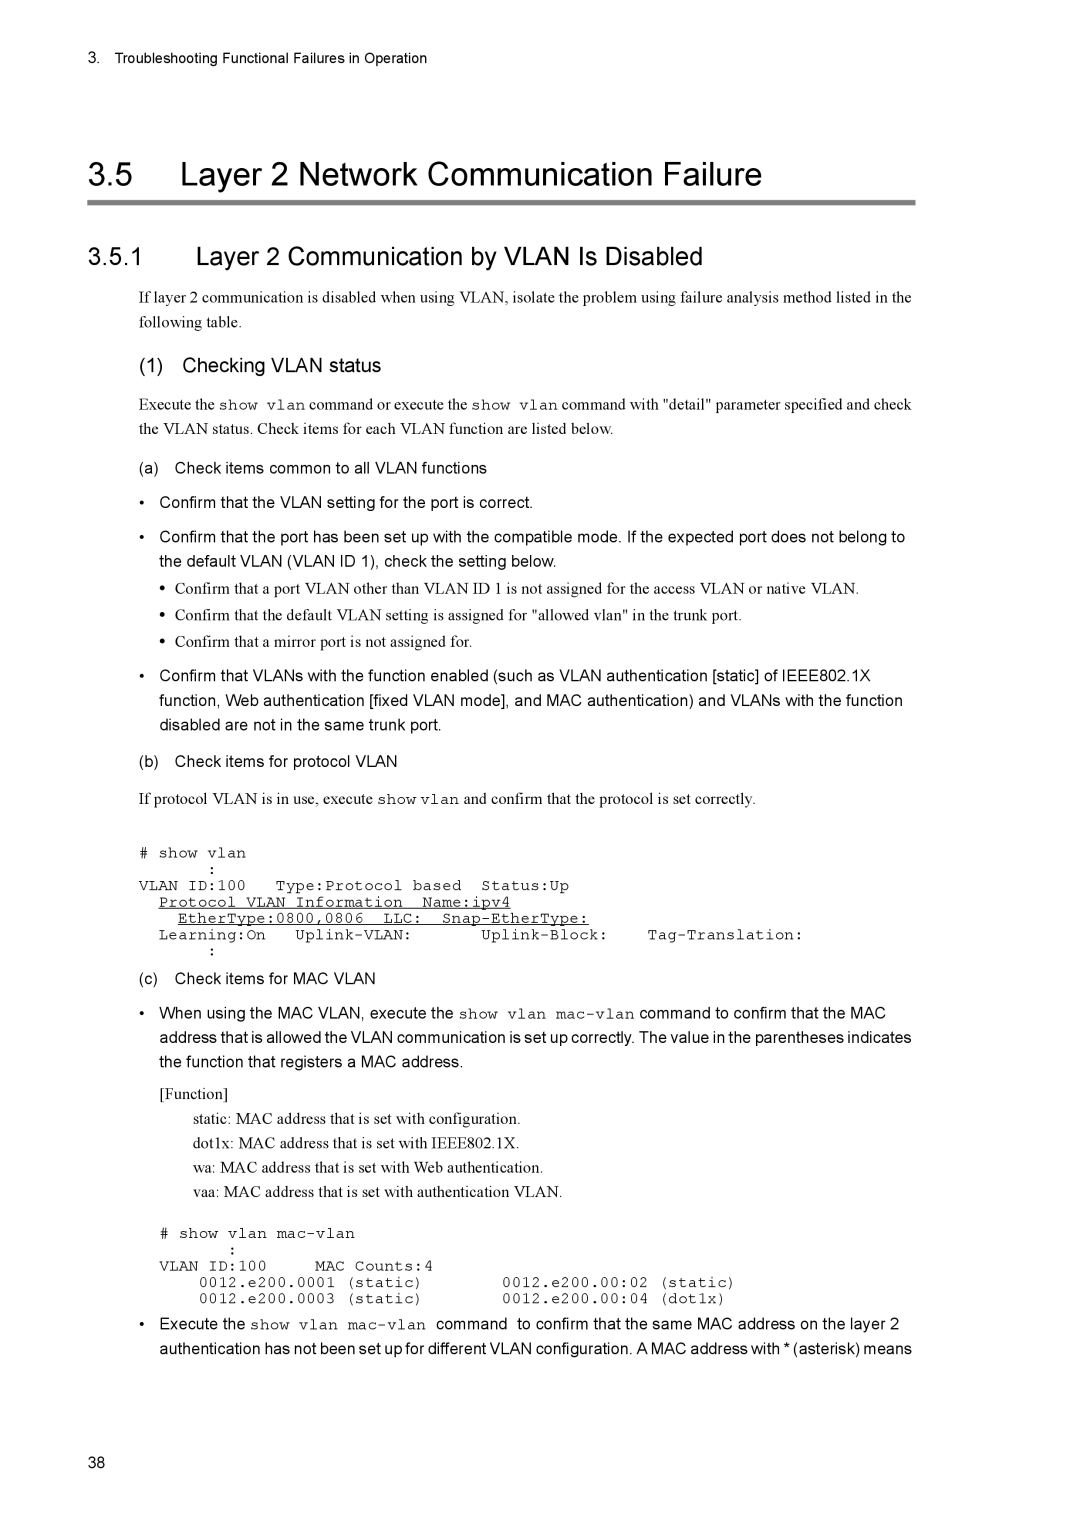 NEC IP8800/S6600 Layer 2 Network Communication Failure, Layer 2 Communication by Vlan Is Disabled, Checking Vlan status 